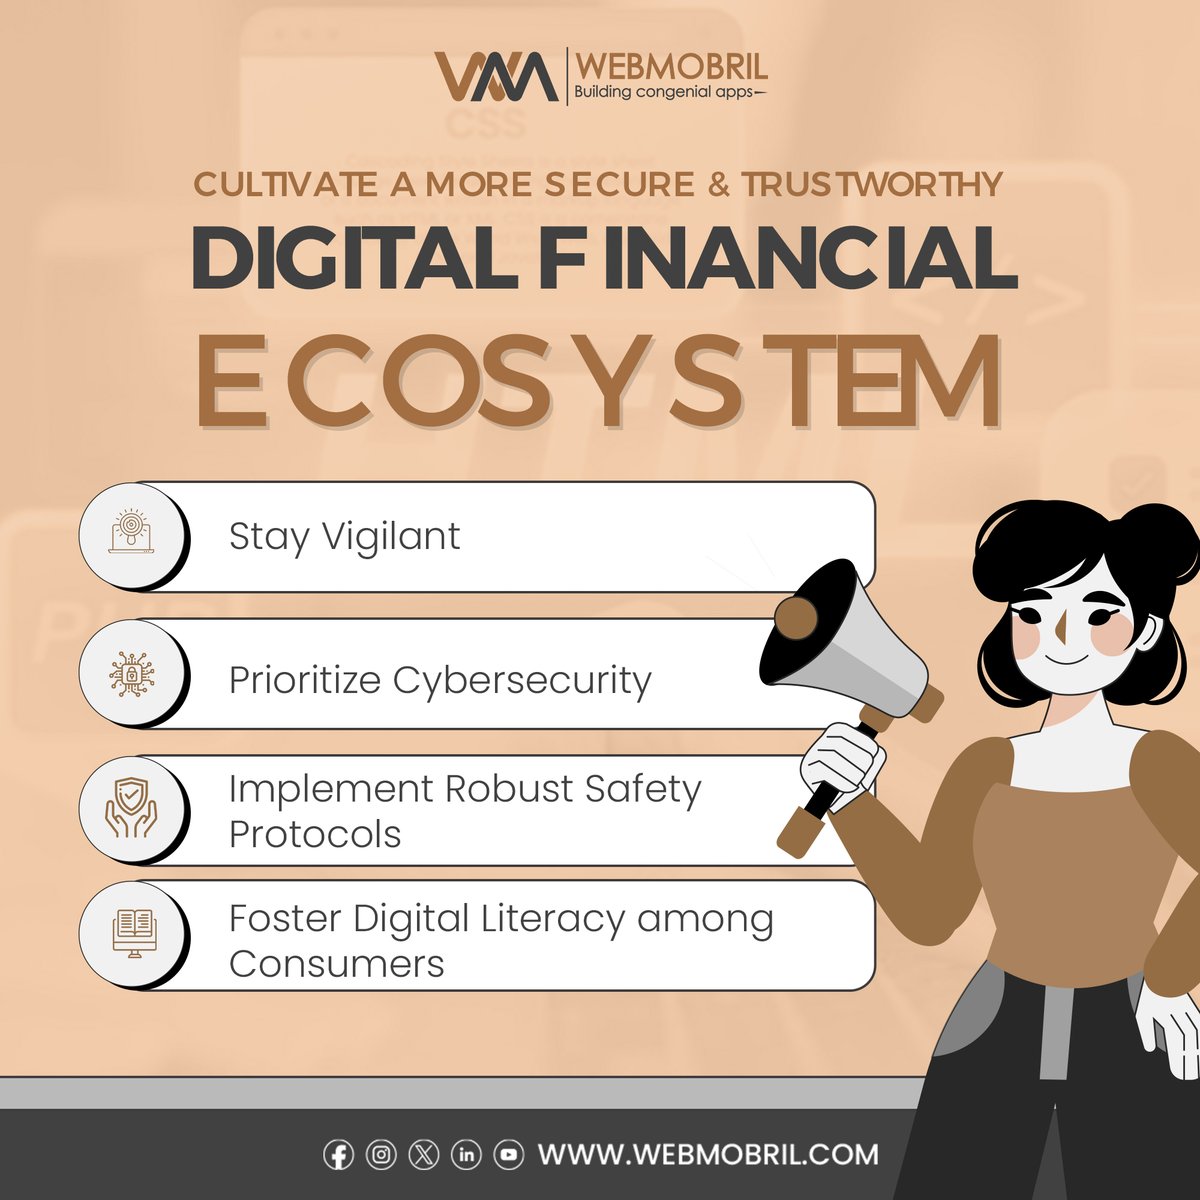 Tips to secure your digital finances: Stay vigilant, prioritize cybersecurity, implement robust safety protocols, and foster digital literacy. 
.
.
.
#DigitalSafety #CyberAware #SecureFinance #DigitalTrust #cybersecurity #fintech #Digital #webmobril